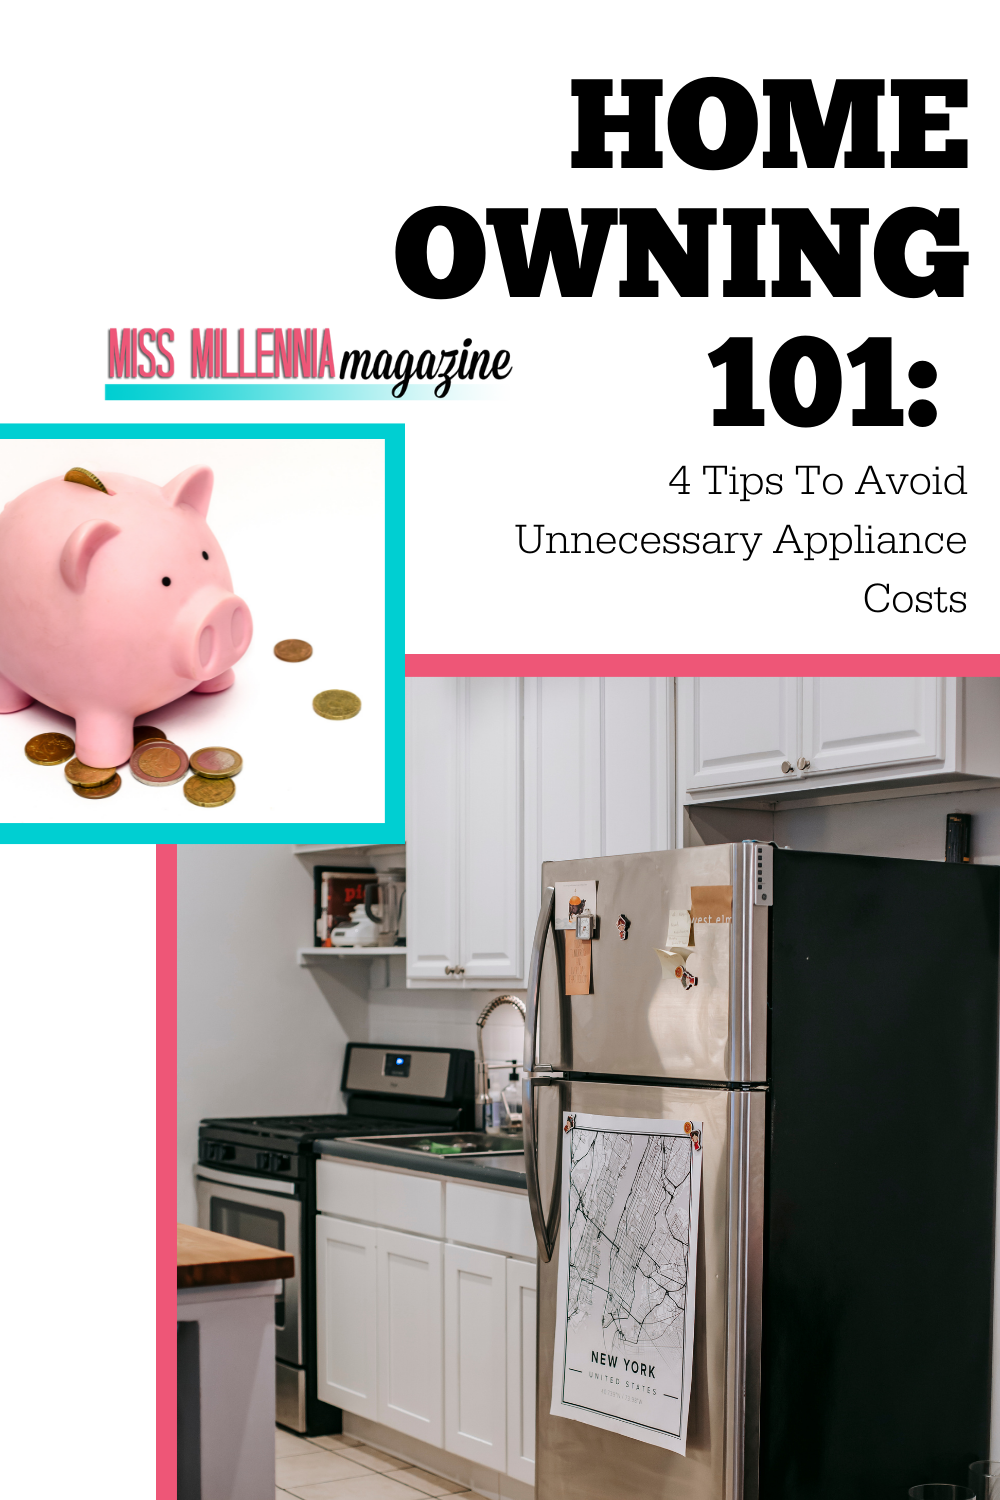 Home Owning 101: 4 Tips To Avoid Unnecessary Appliance Costs